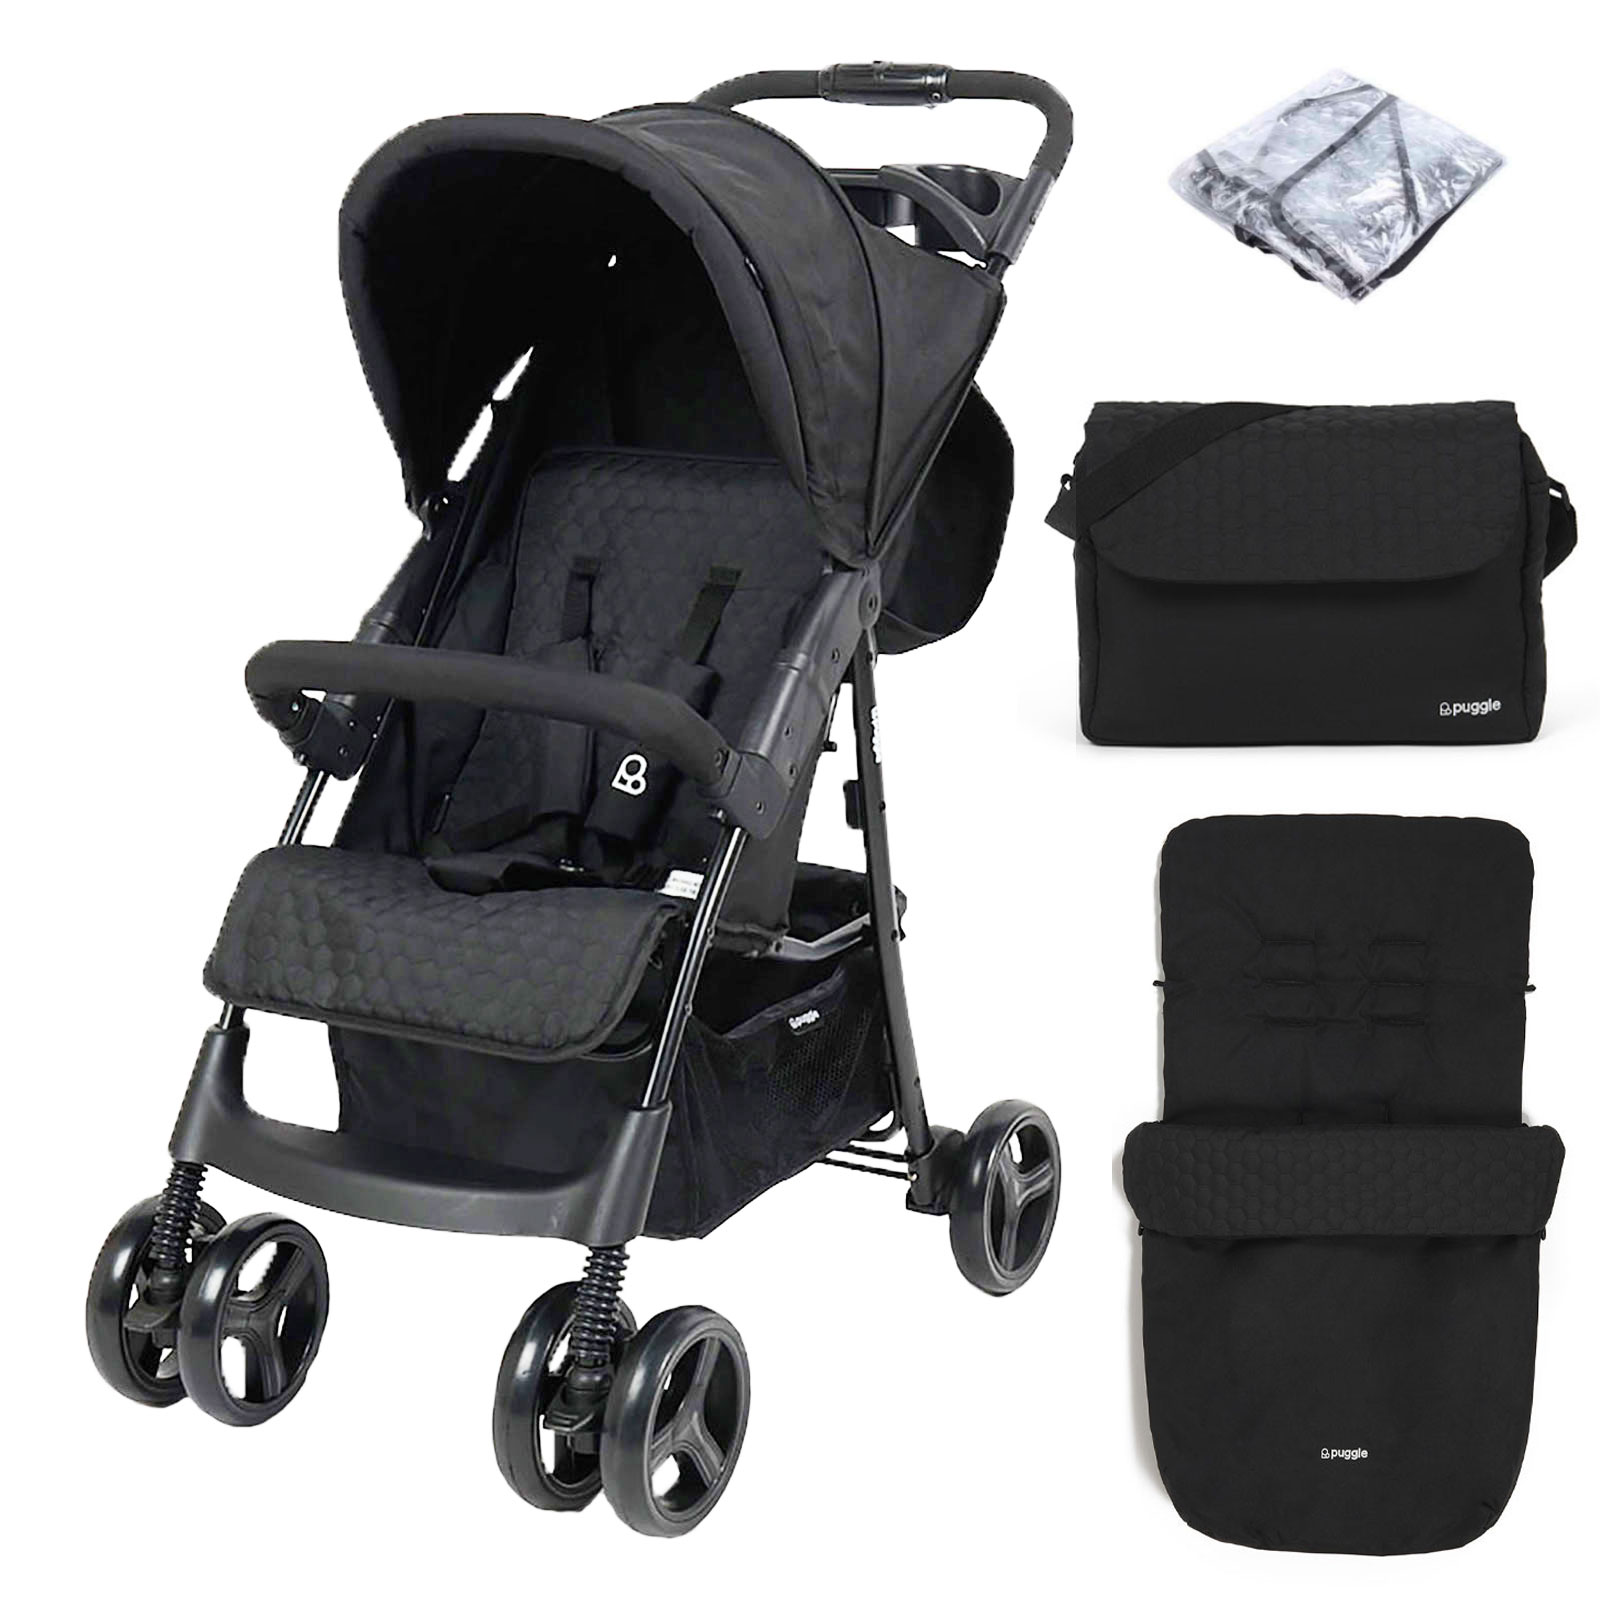 Puggle Starmax Pushchair Stroller with Raincover, Universal Footmuff and Changing Bag with Mat – Storm Black